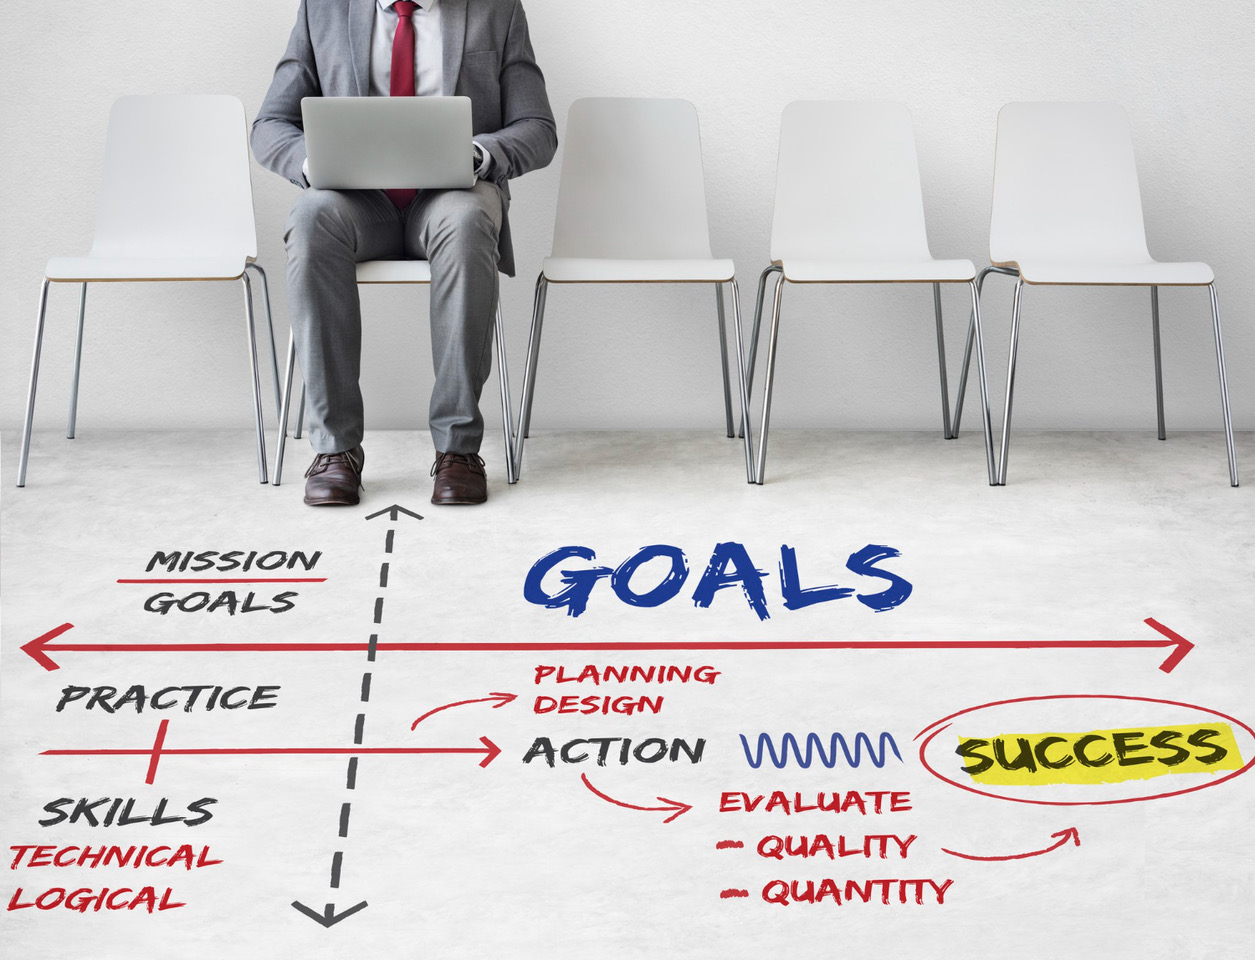 Why is goal setting vital for team progress and success?